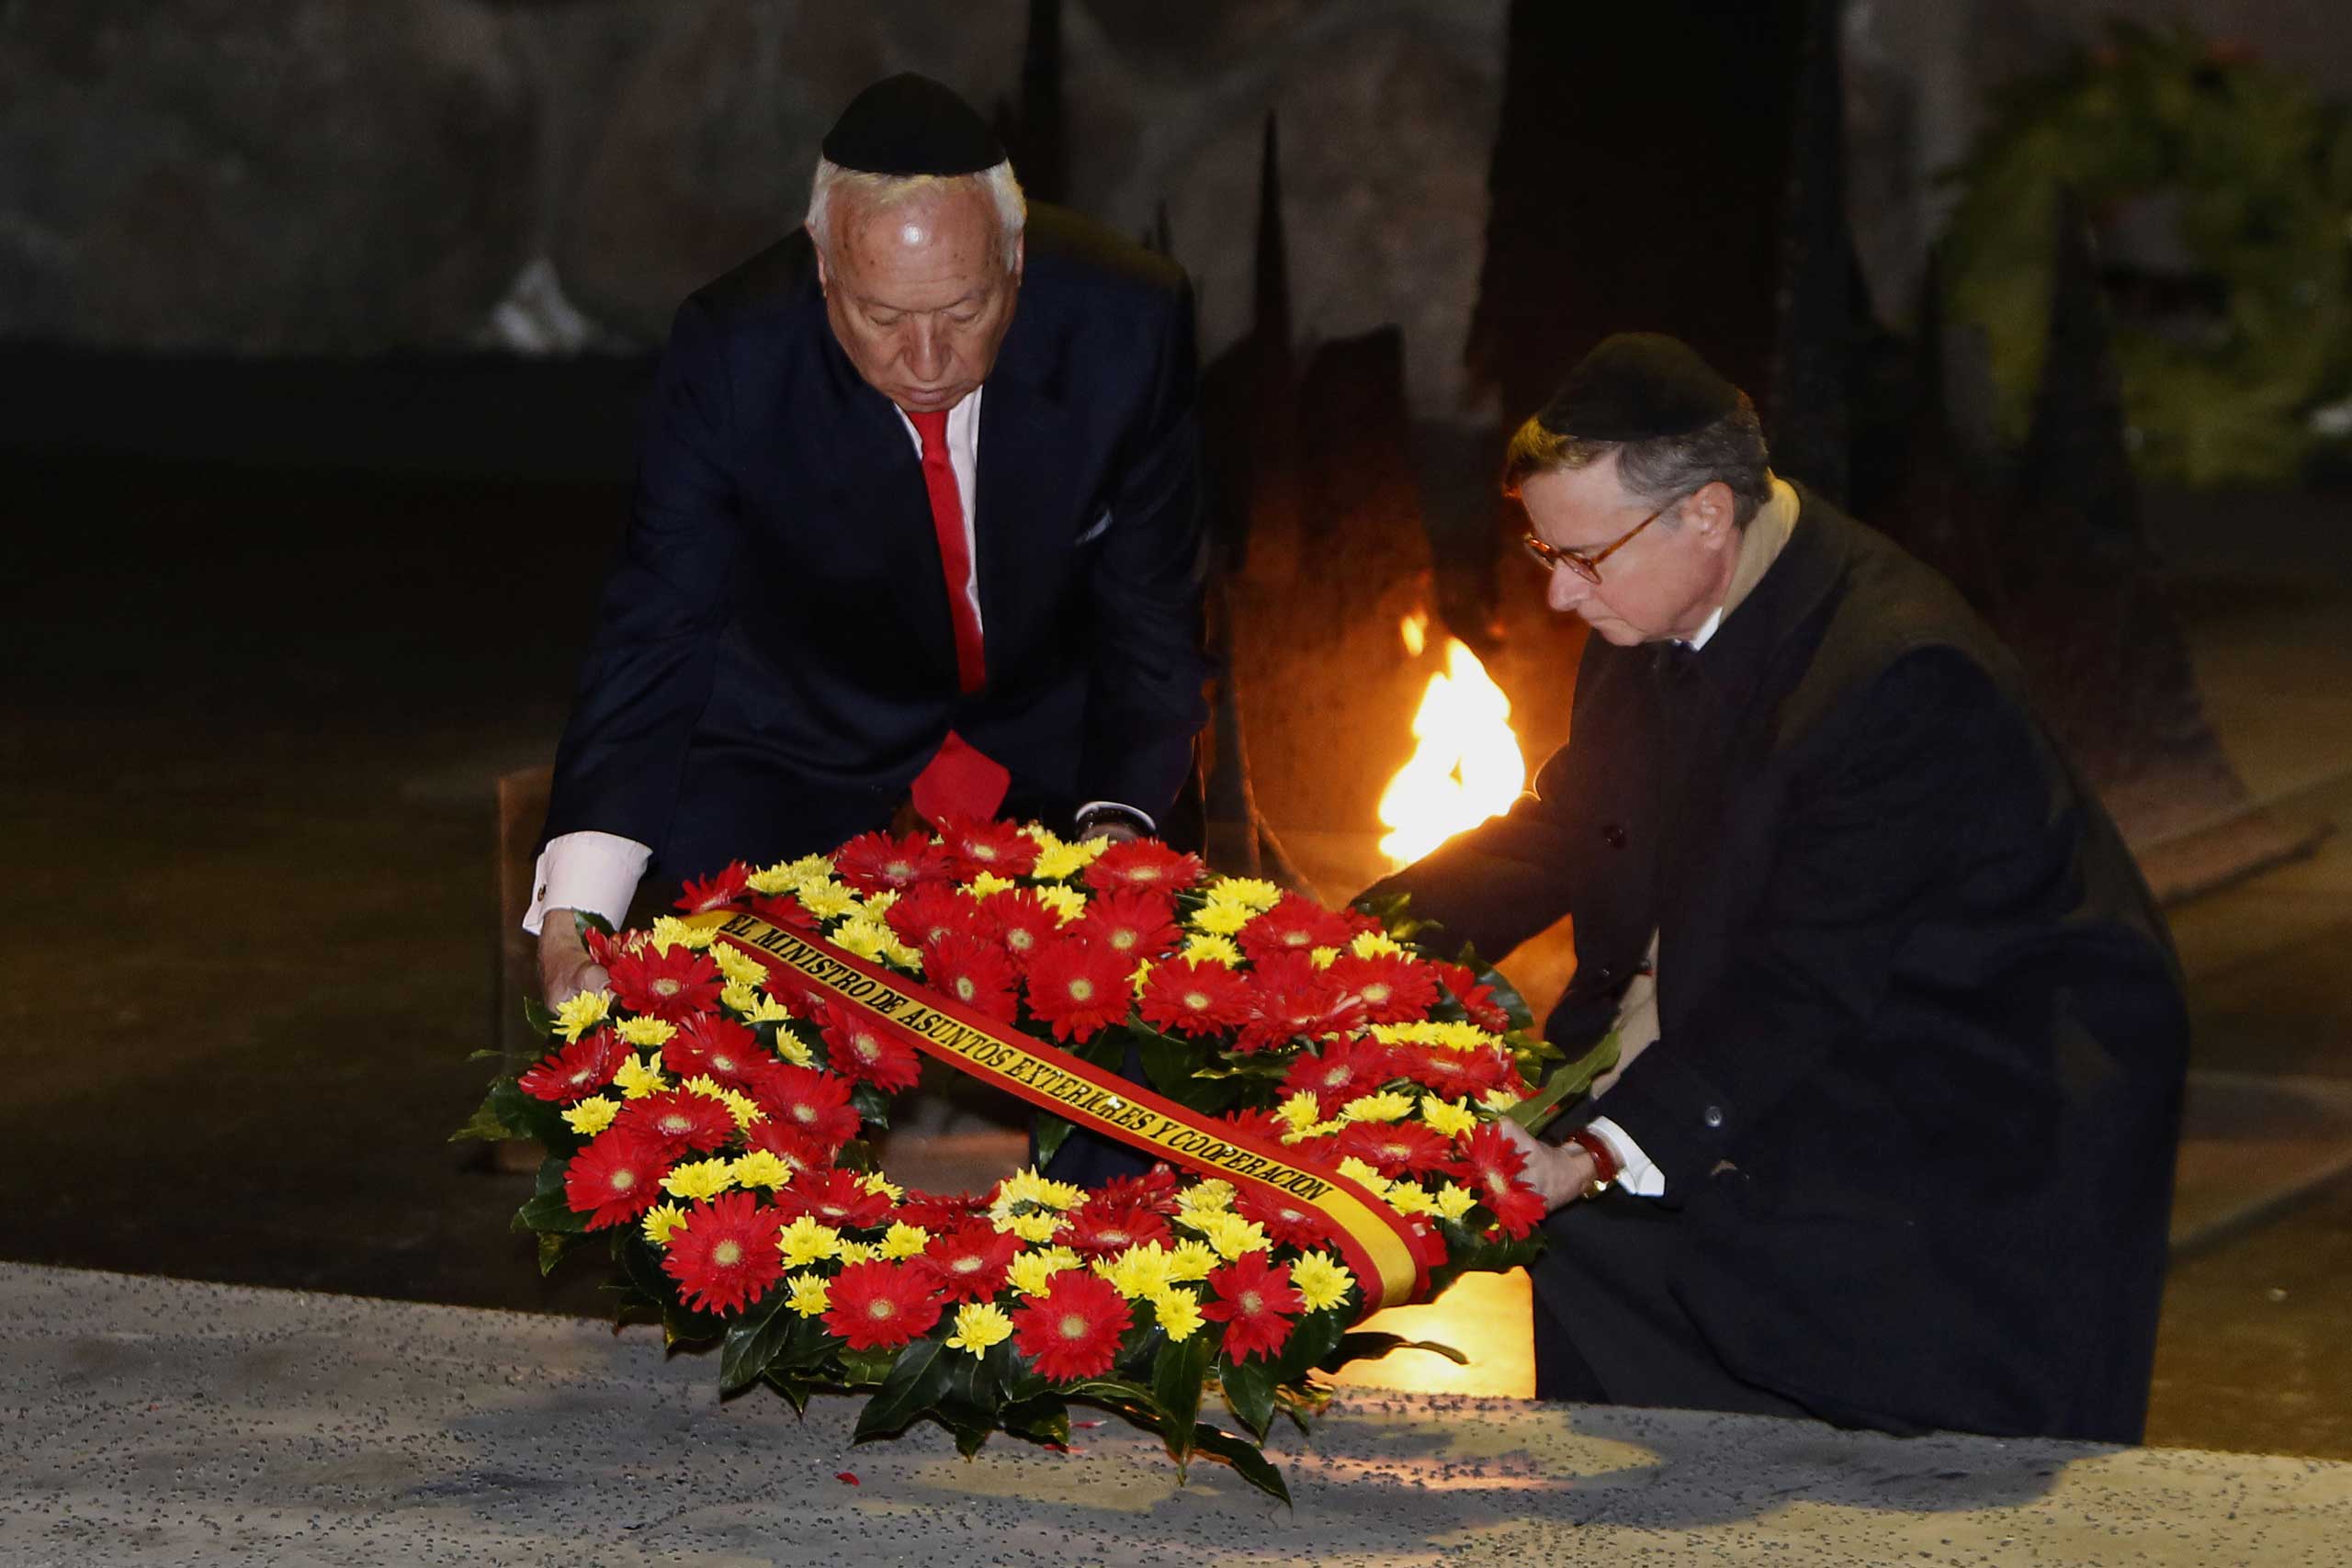 Spanish Foreign Minister Jose Manuel Garcia-Margallo (L) lays a wreath at the Hall of Remembrance on Jan. 14, 2015, during his visit to the Yad Vashem Holocaust Memorial museum in Jerusalem that commemorates the six million Jews killed by the Nazis during World War II. (Gali Tibbon—AFP/Getty Images)